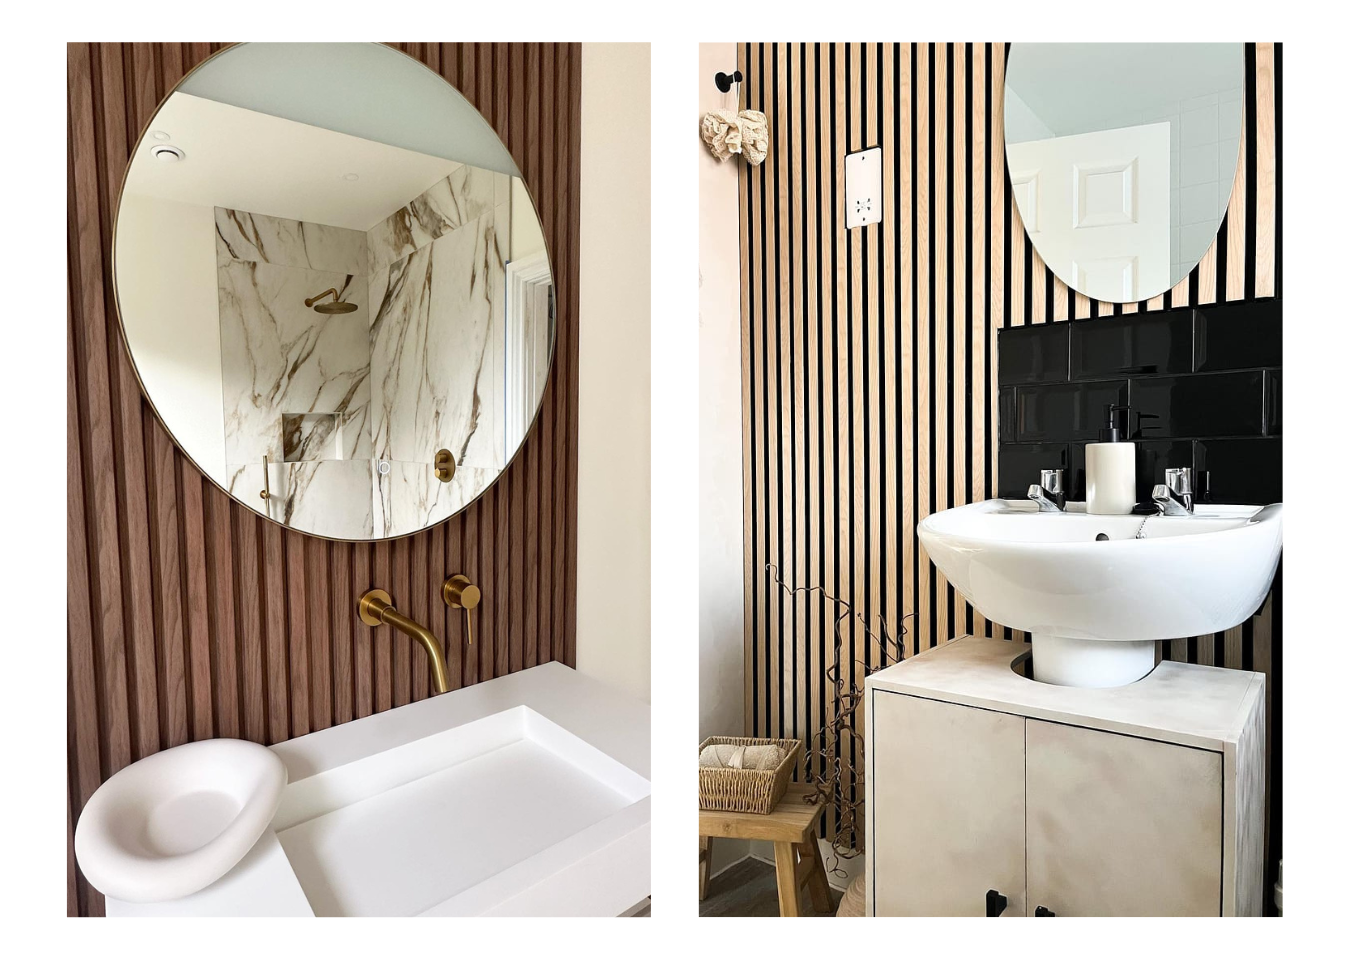 Left: Walnut panels in small bathroom, above white sink and round mirror. Right: Tiny bathroom with waterproof wall panels.